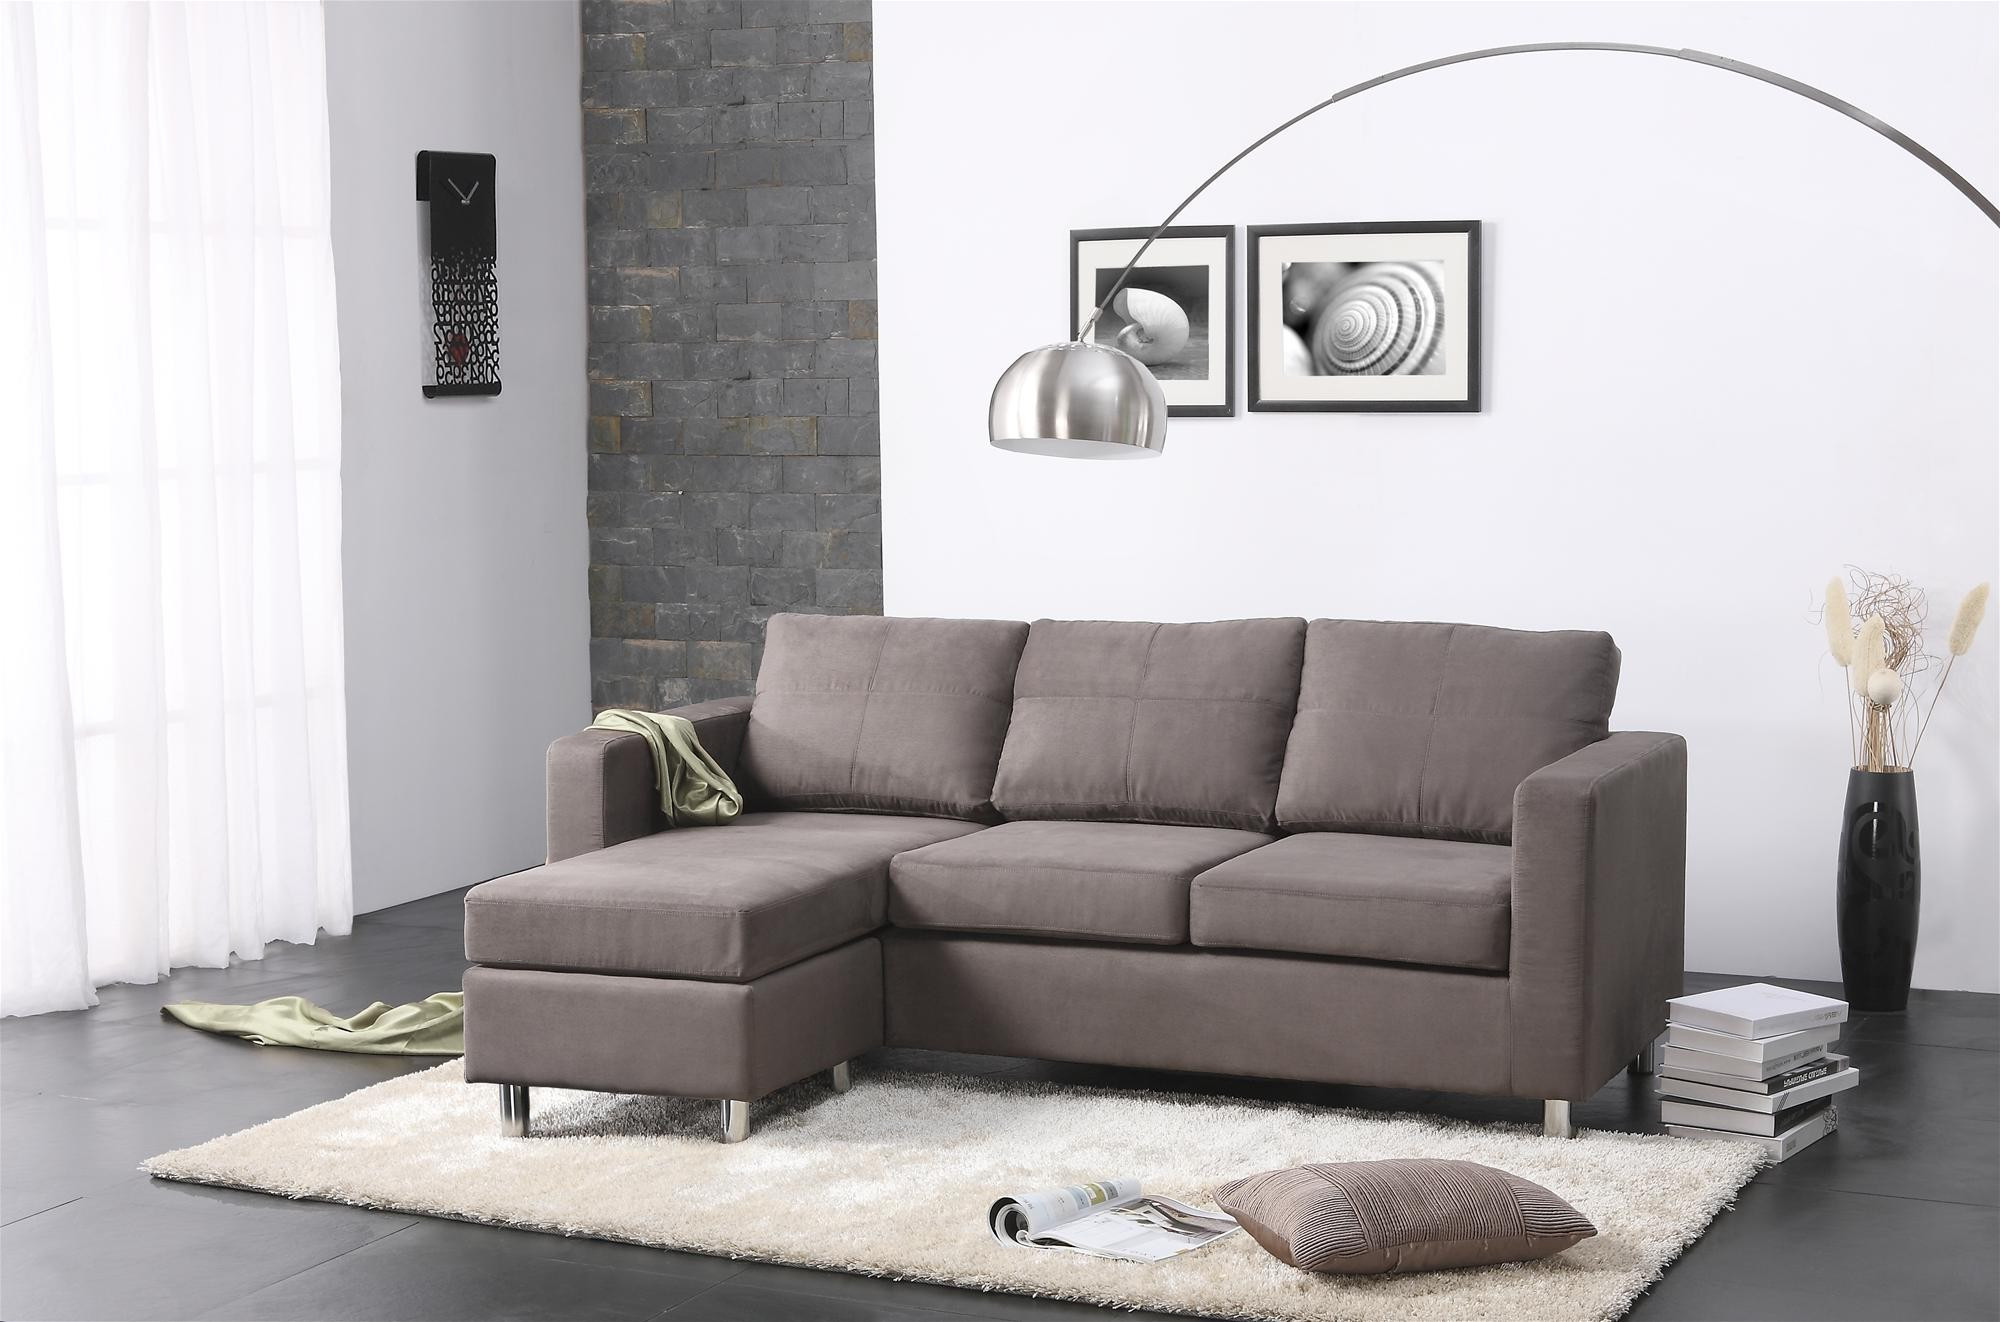 Small Living Room Couch
 Living Rooms with Sectionals Sofa for Small Living Room